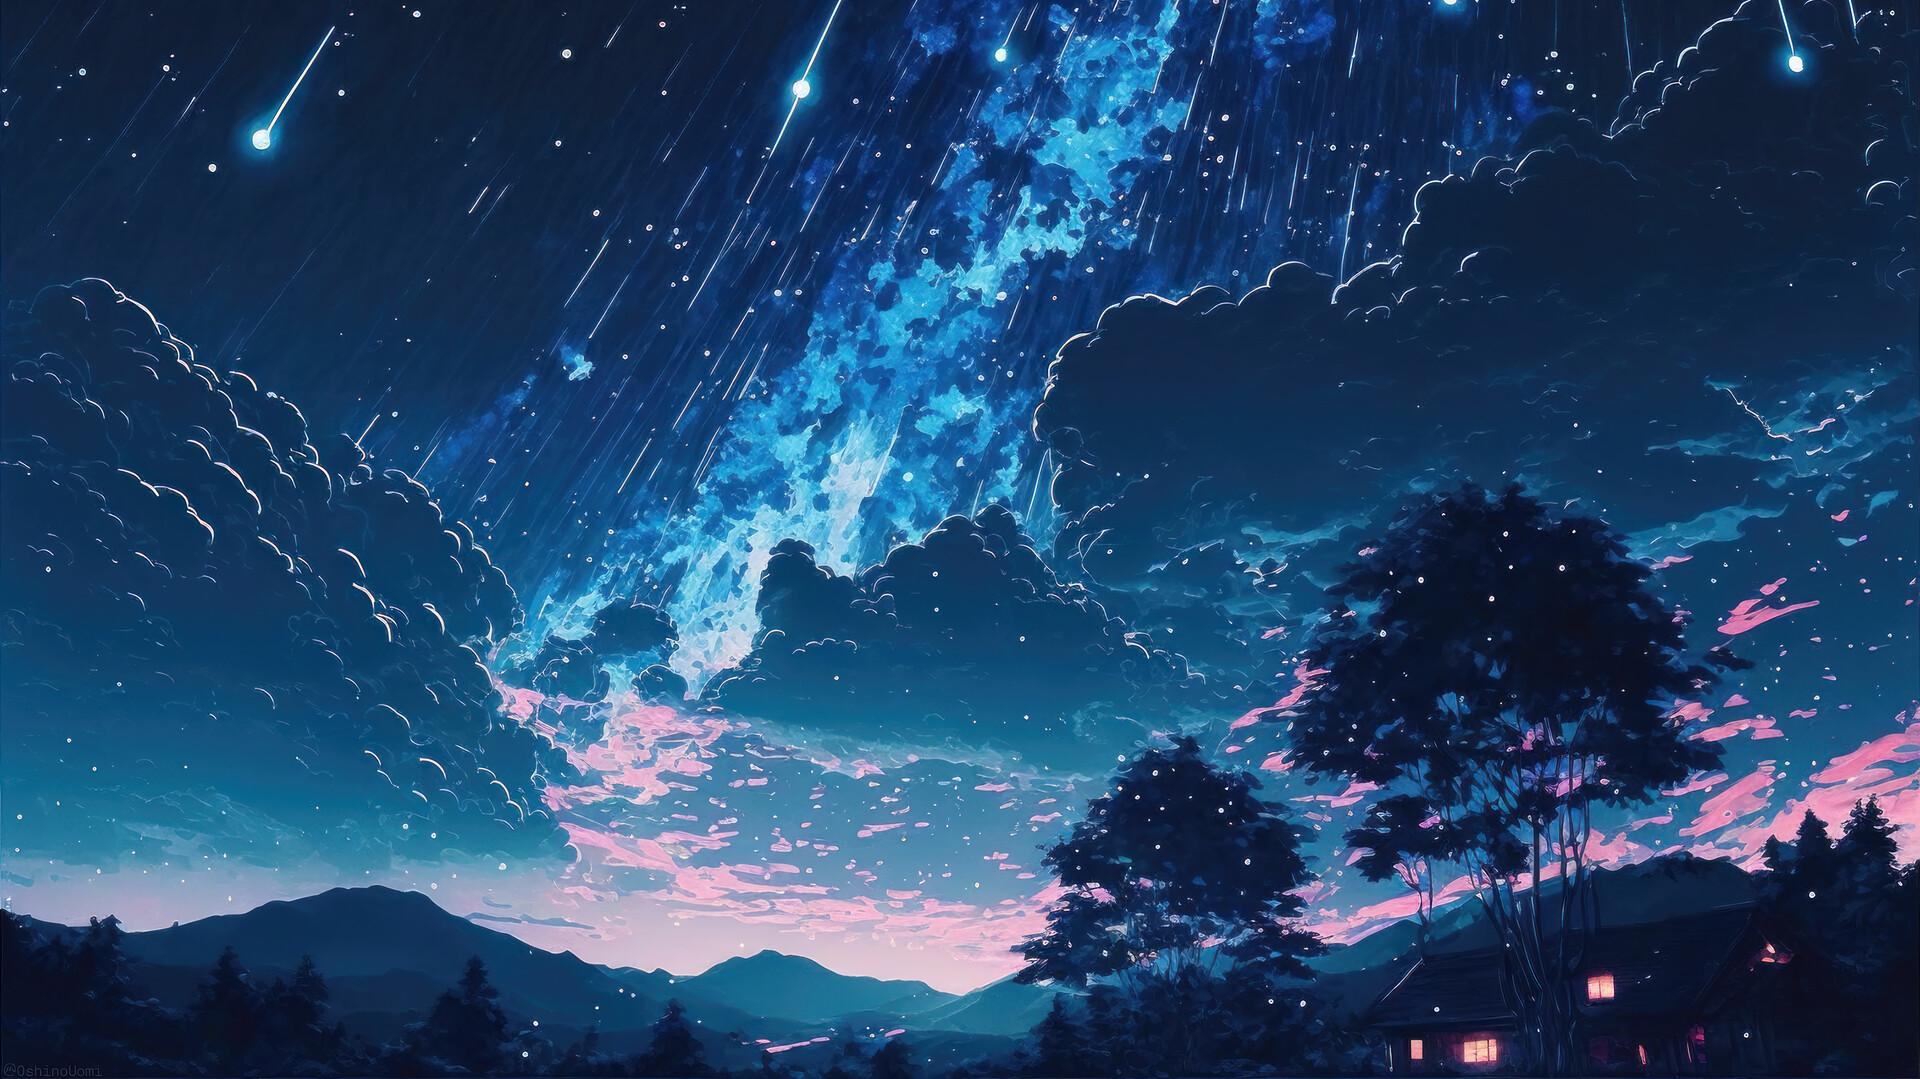 1400+] Anime Aesthetic Pictures | Wallpapers.com